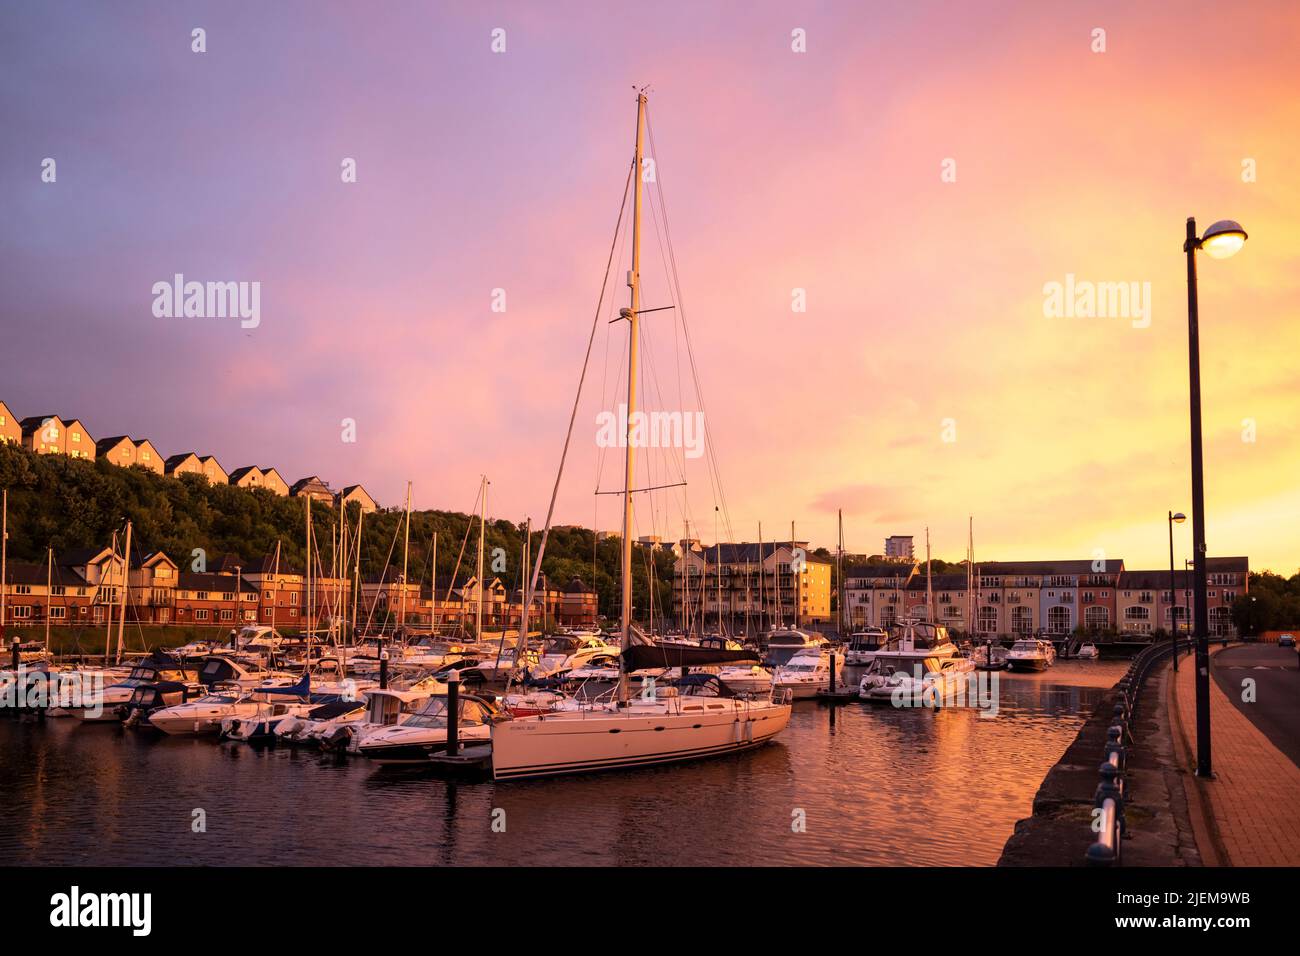 A general view of Penarth Marina in Penarth, Wales, United Kingdom, at sunset. Stock Photo